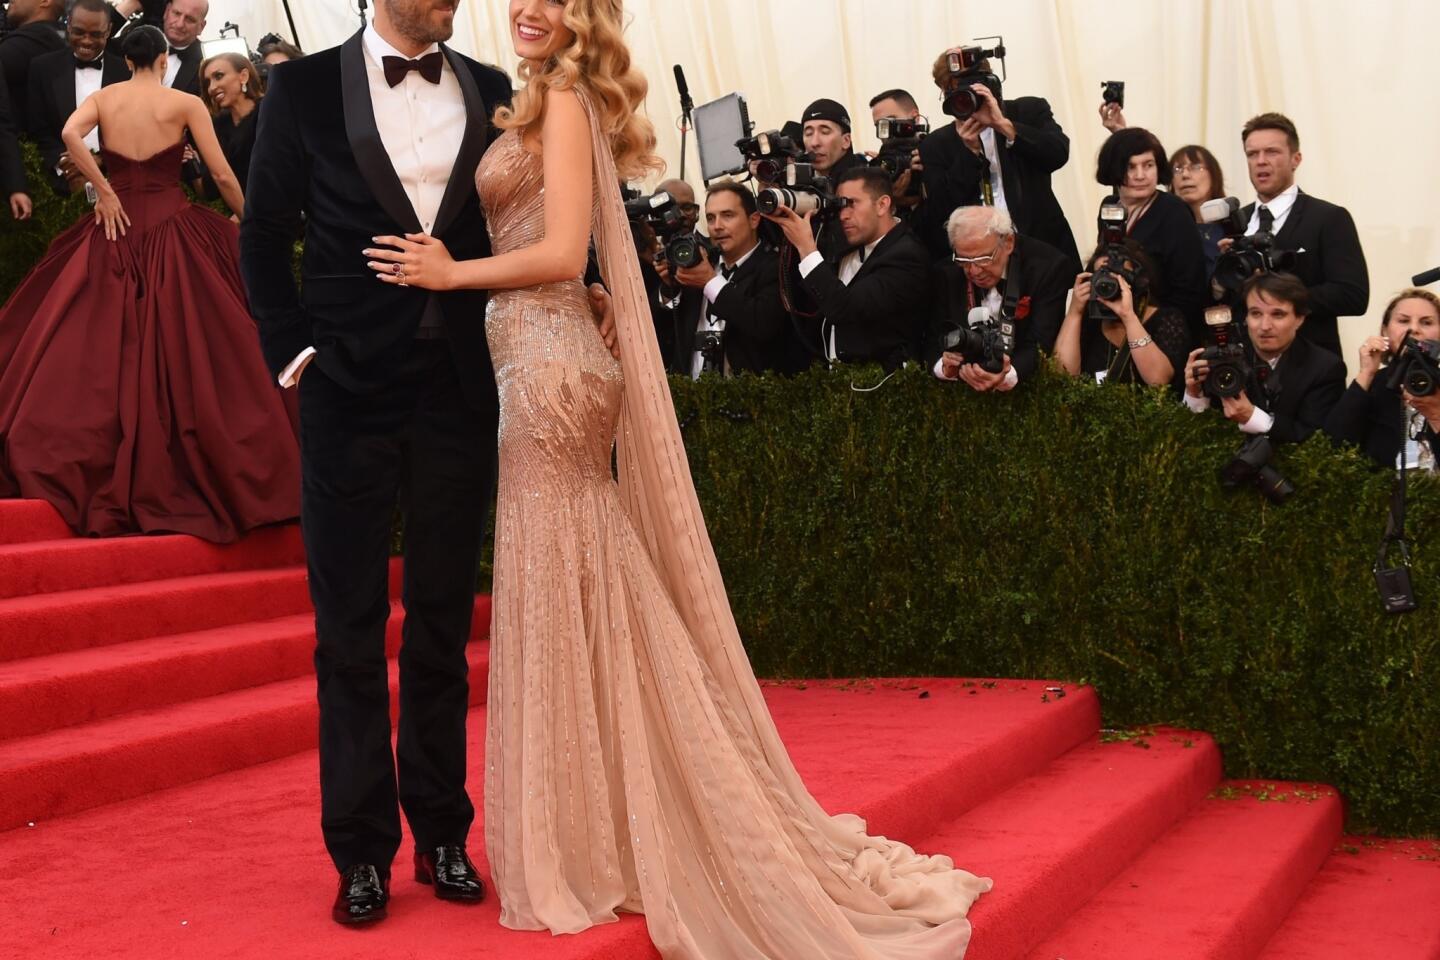 2014 Met Ball couples | Ryan Reynolds and Blake Lively